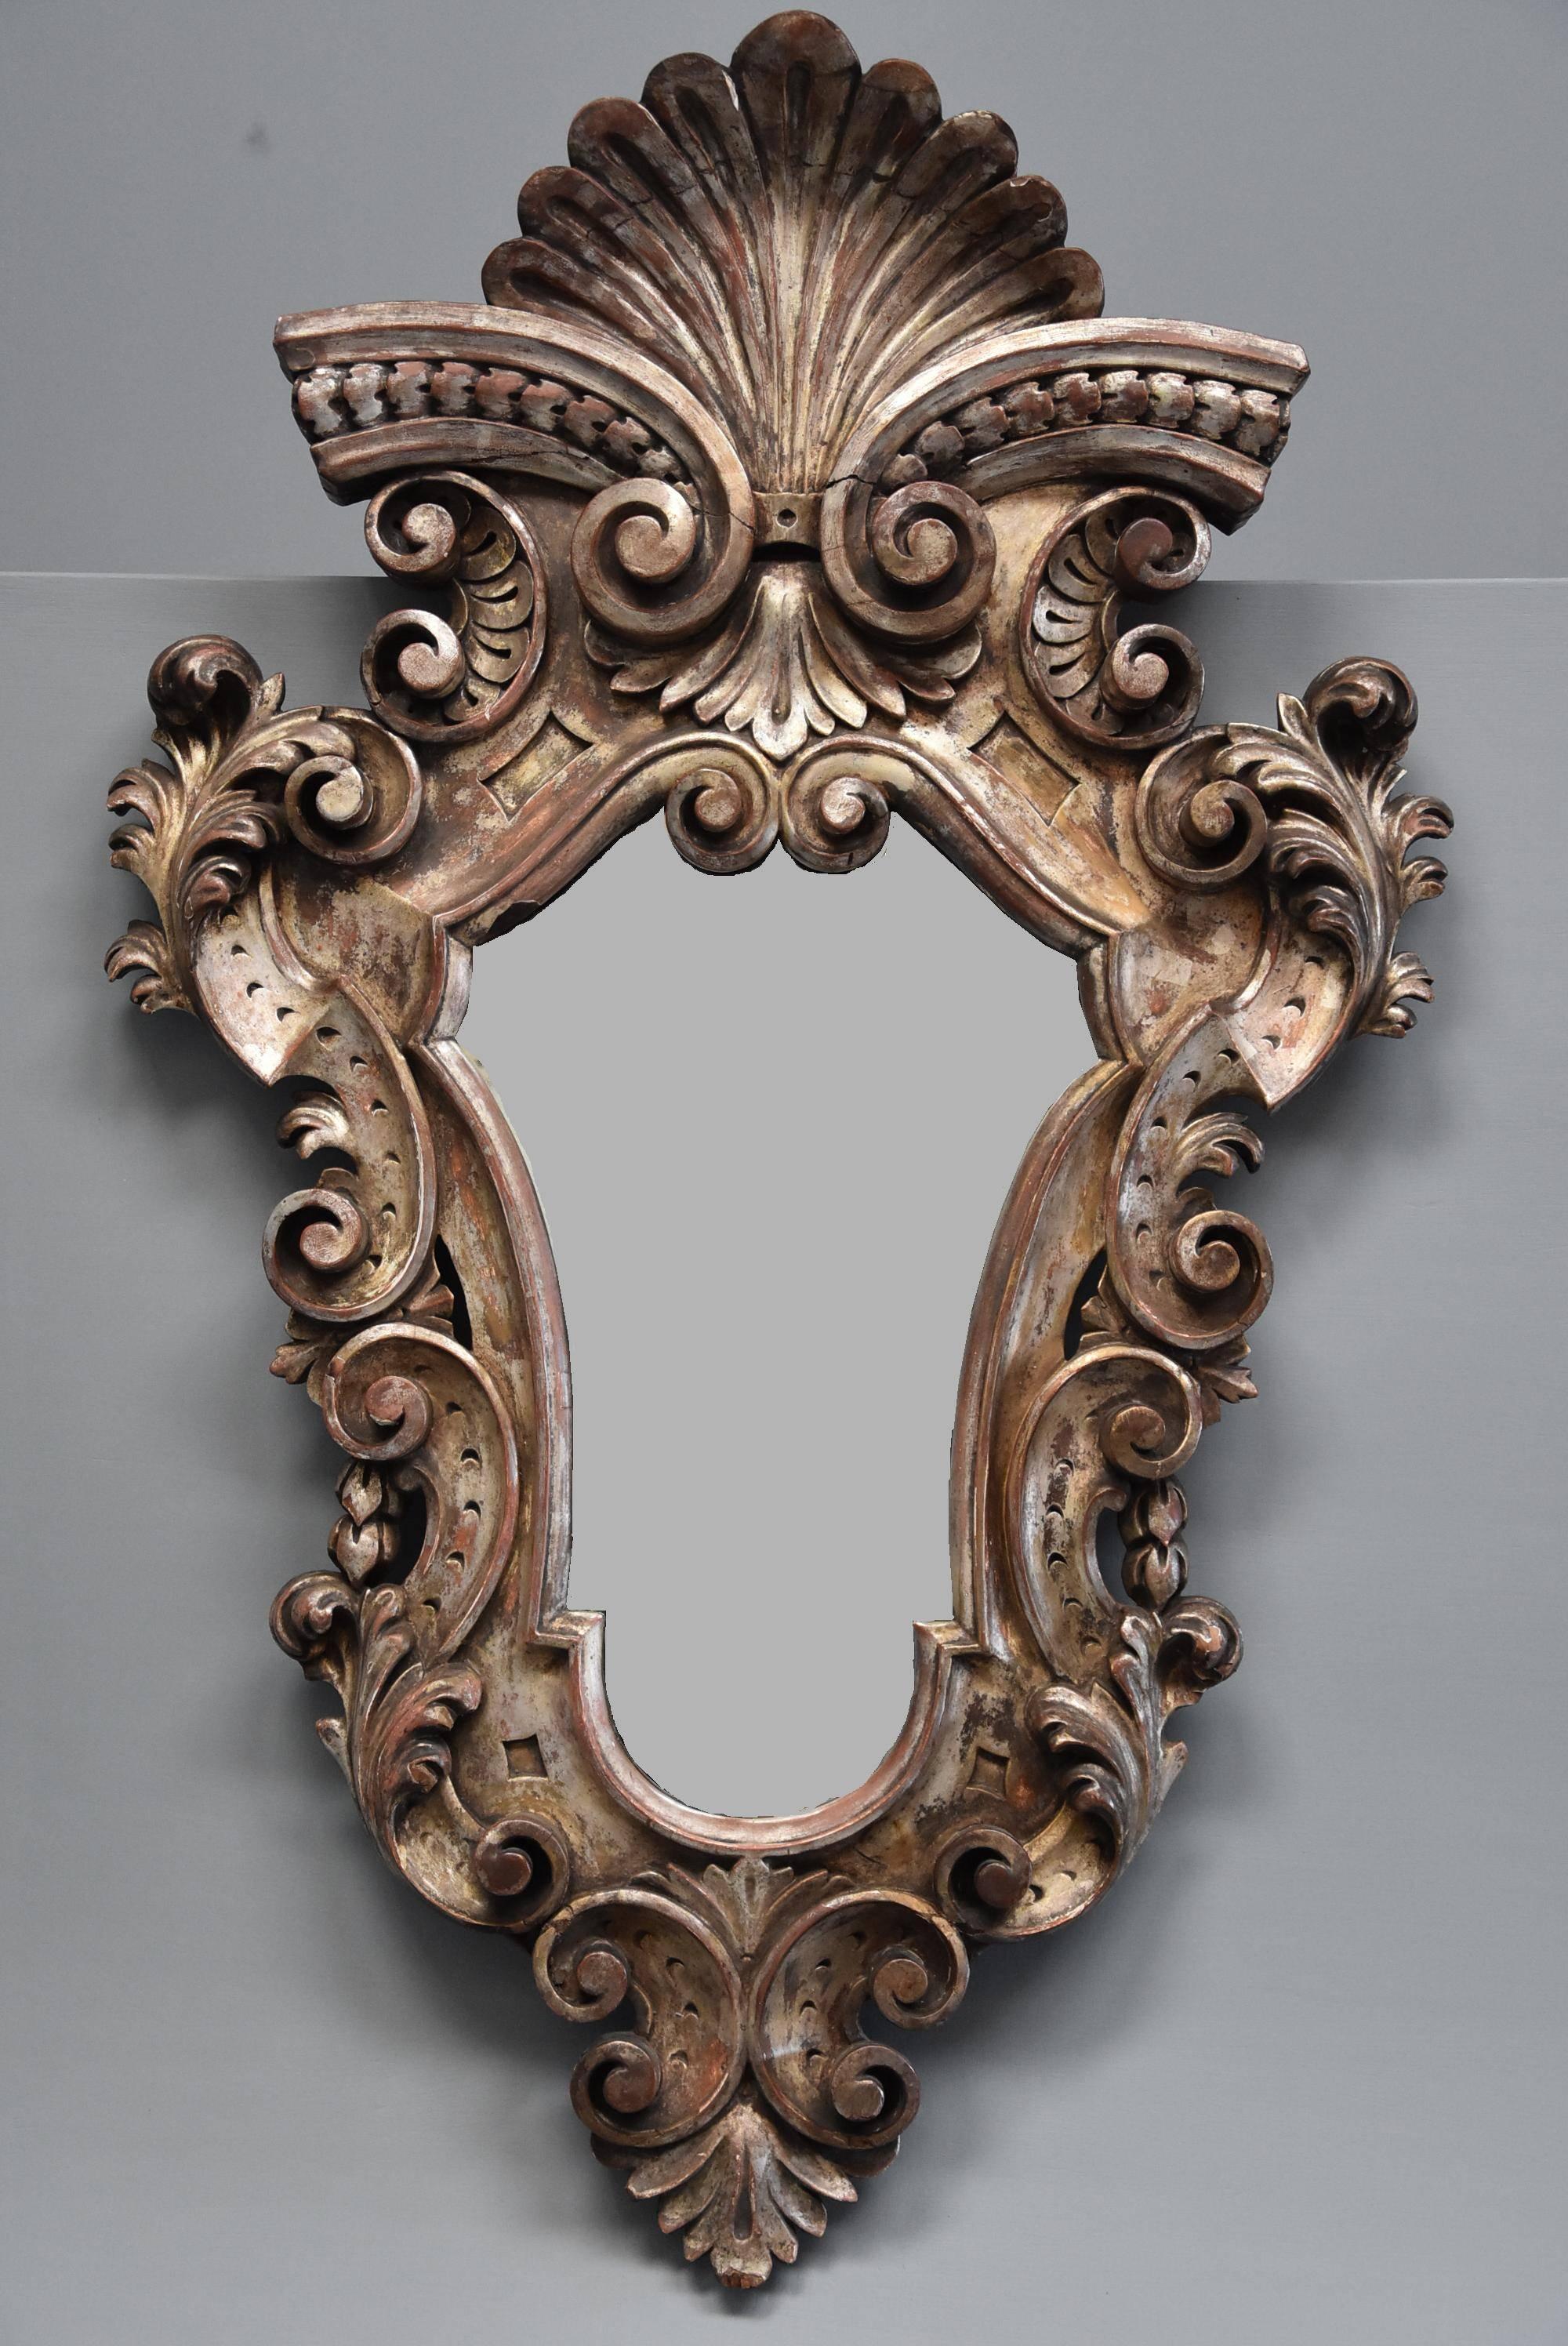 A highly decorative late 19th century Italian silver giltwood Rococo style mirror.

The mirror consists of a highly decorative silver gilt pine frame of typical Rococo shape and design with central carved scallop shell to the top with carved